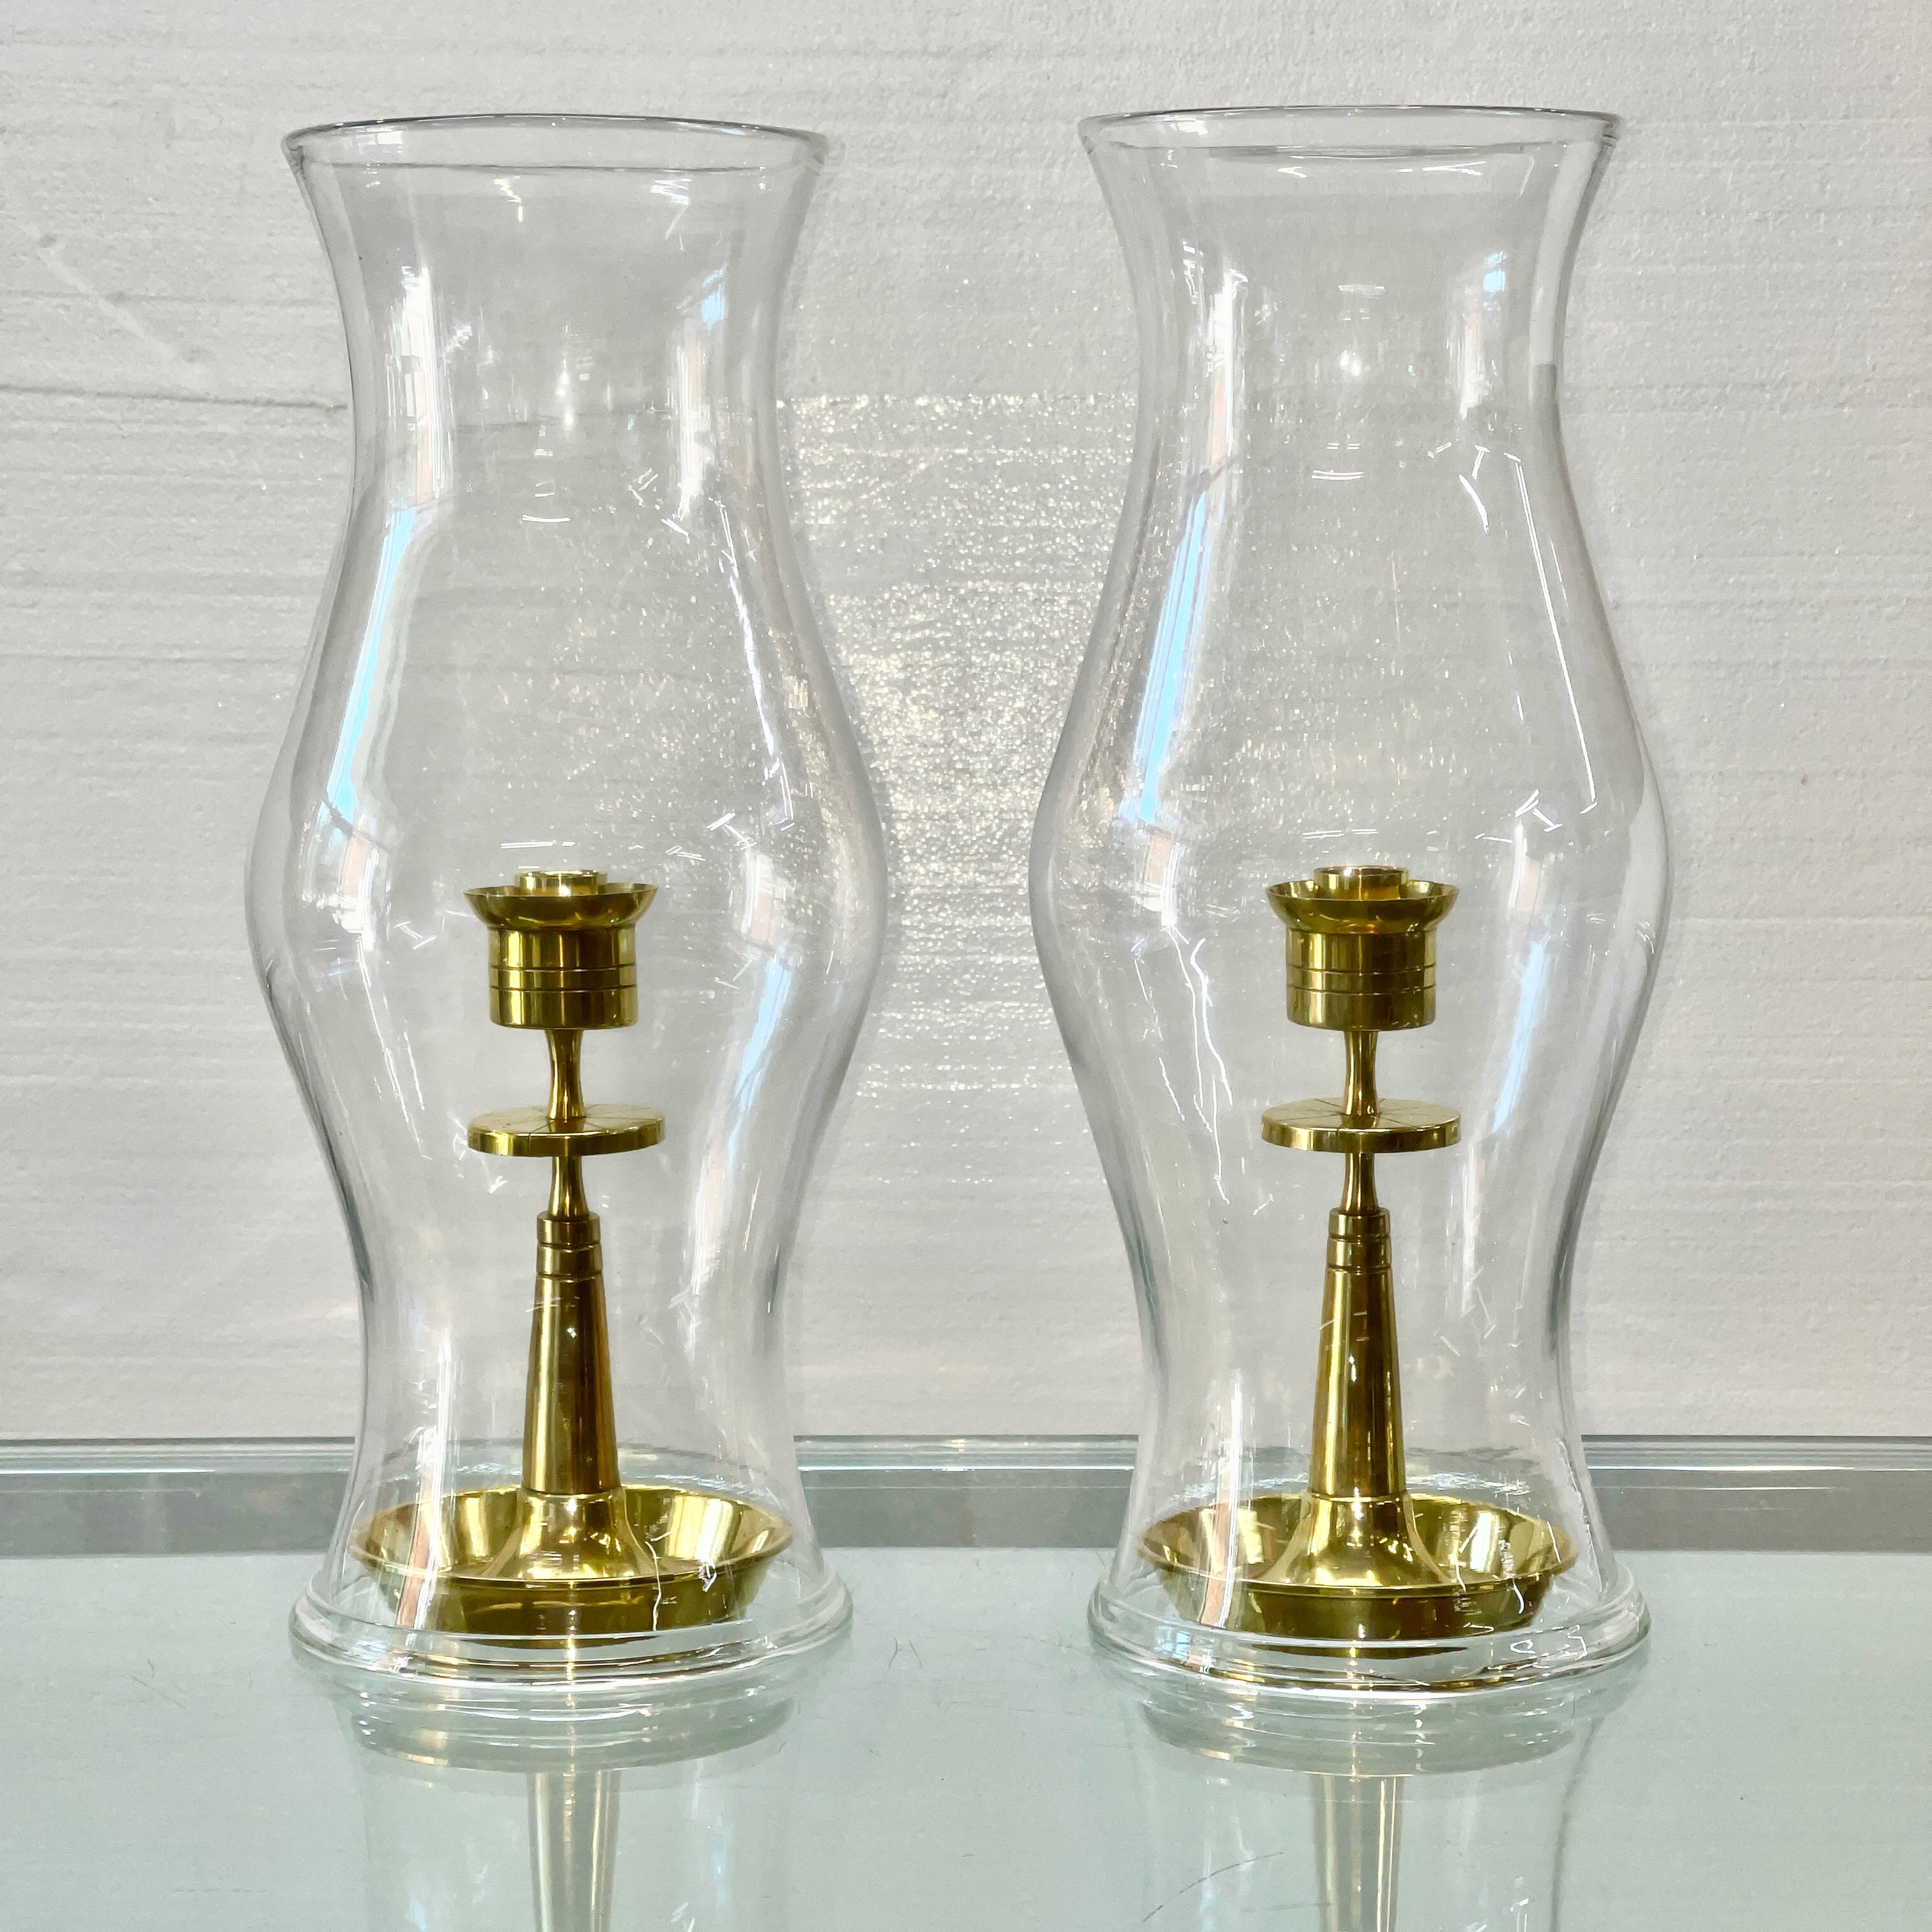 Pair of brass candle holders from Dorlyn Silversmiths' early 1950's brass ware collection designed by Tommi Parzinger including a pair of shaped hurricane glass shades.

Measures: Candle holders are 9.5